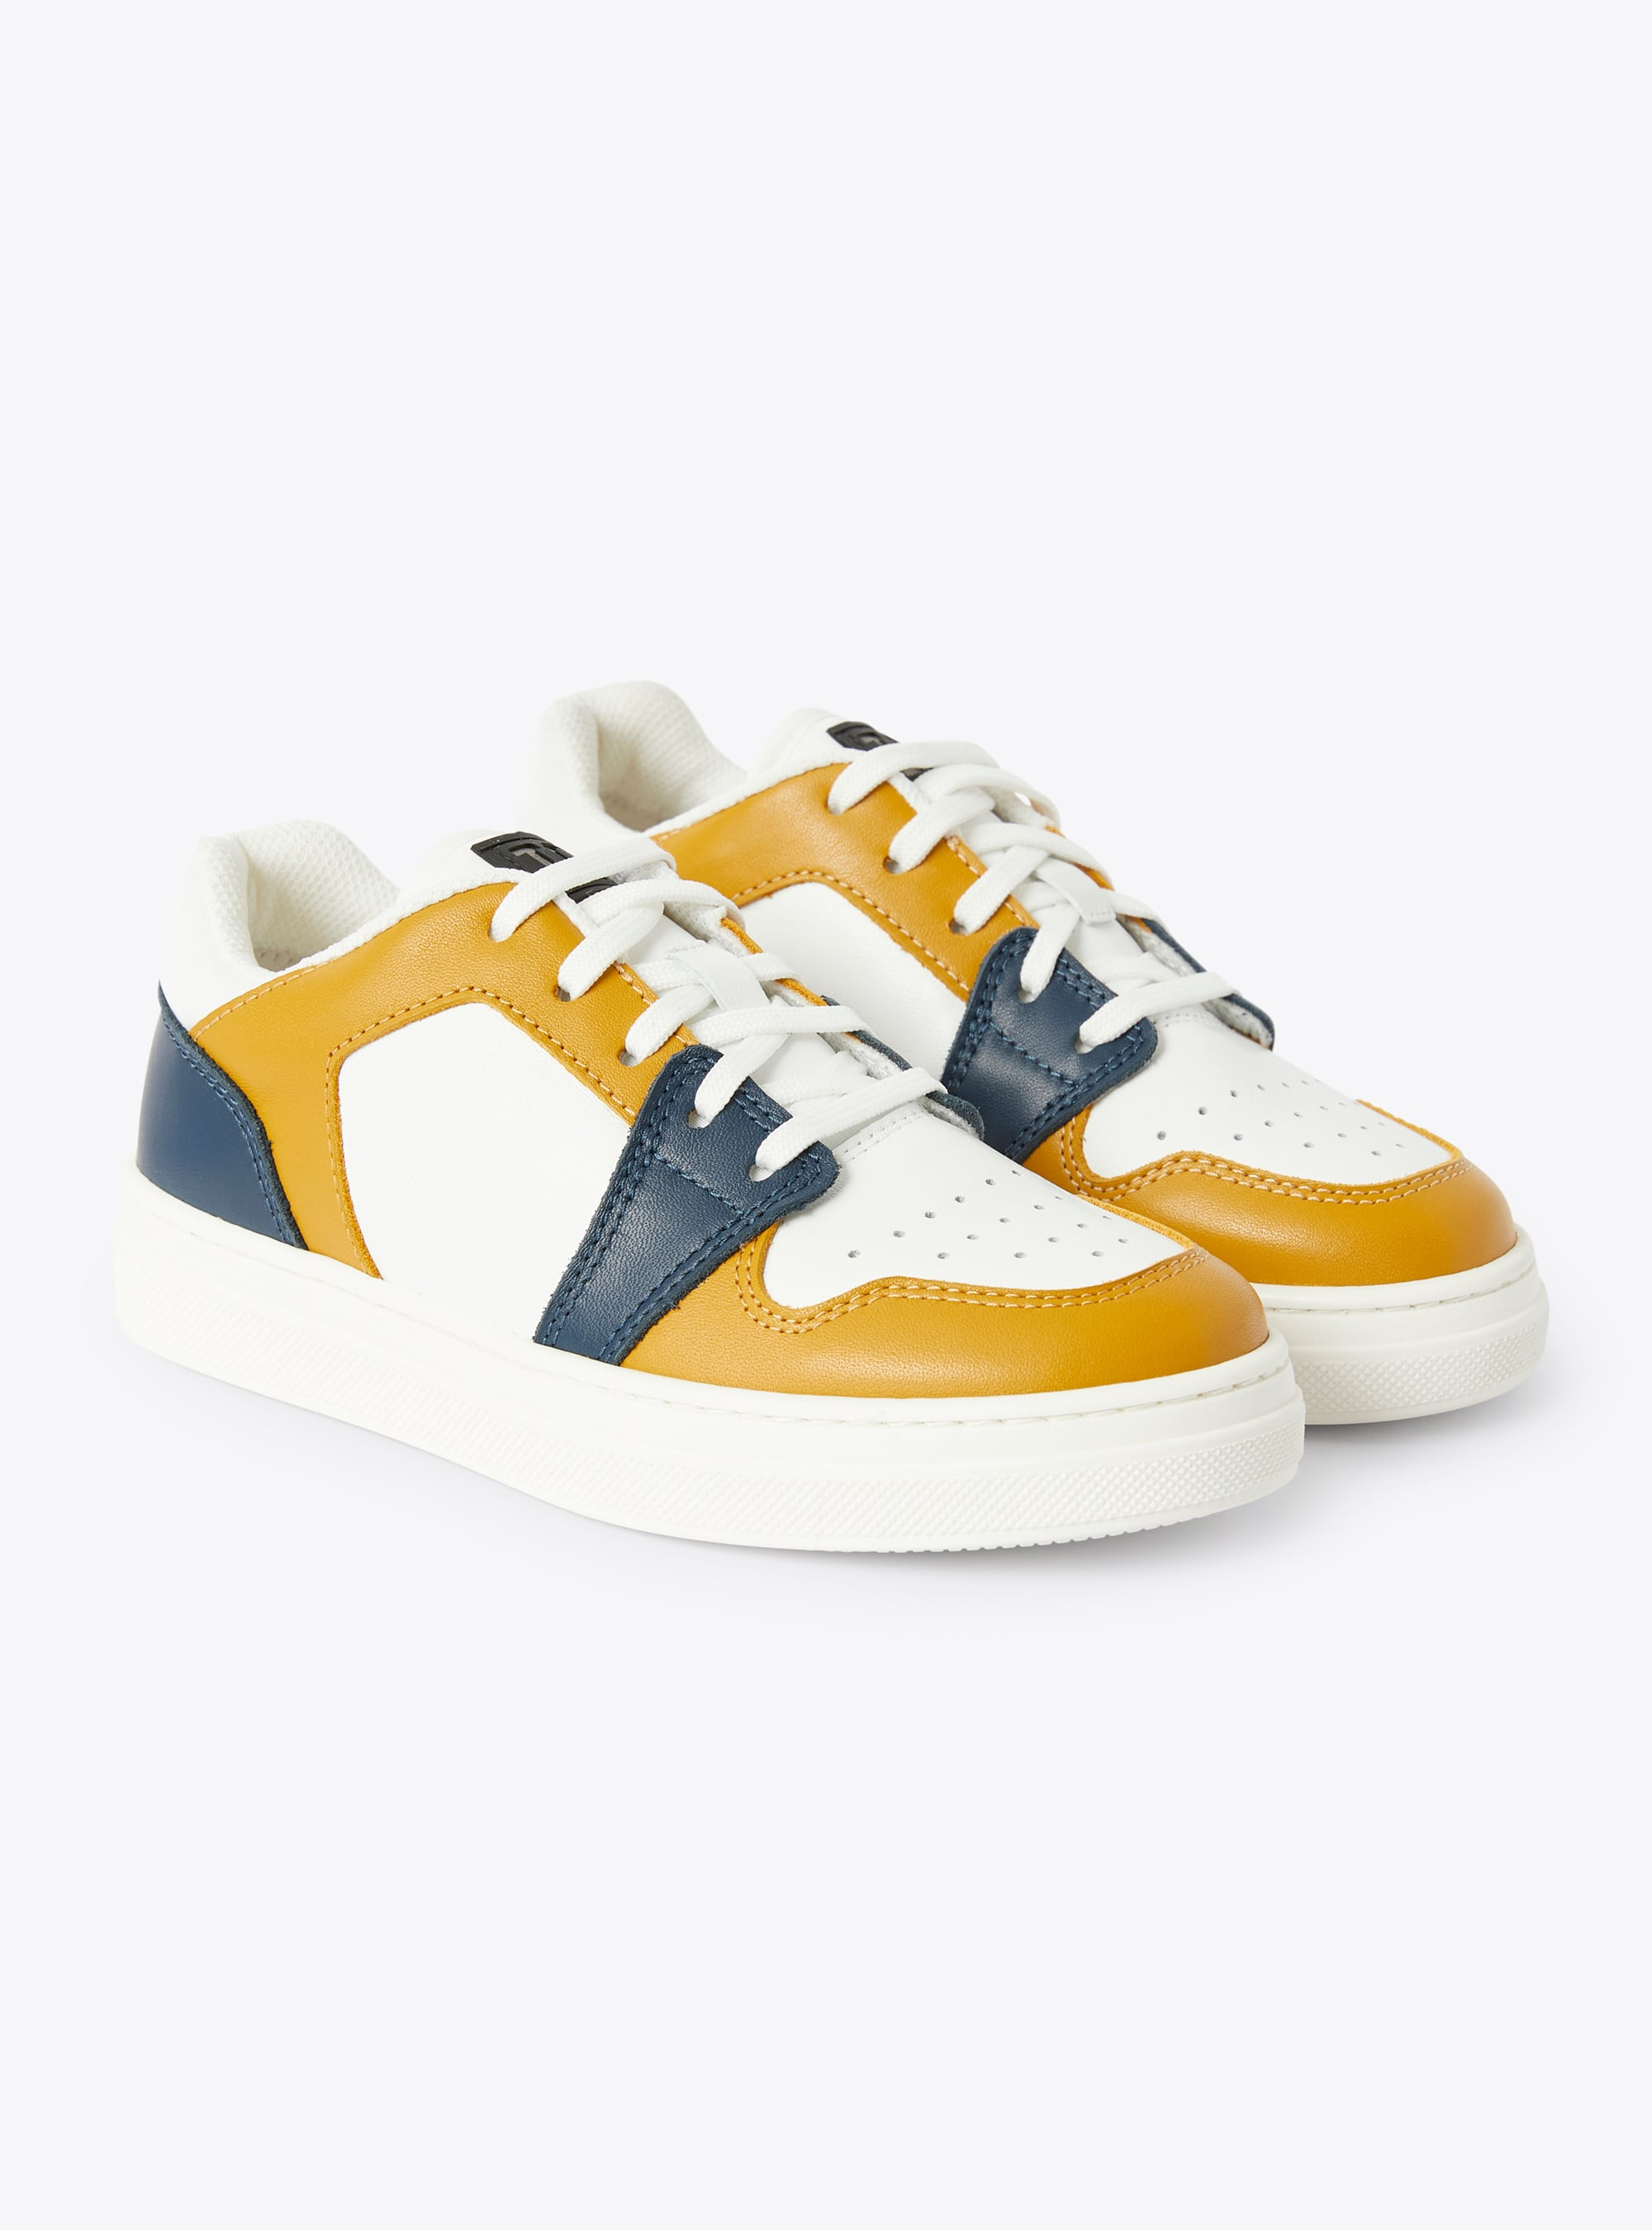 Low-top two-tone IG sneaker in cinnamon and blue - Shoes - Il Gufo